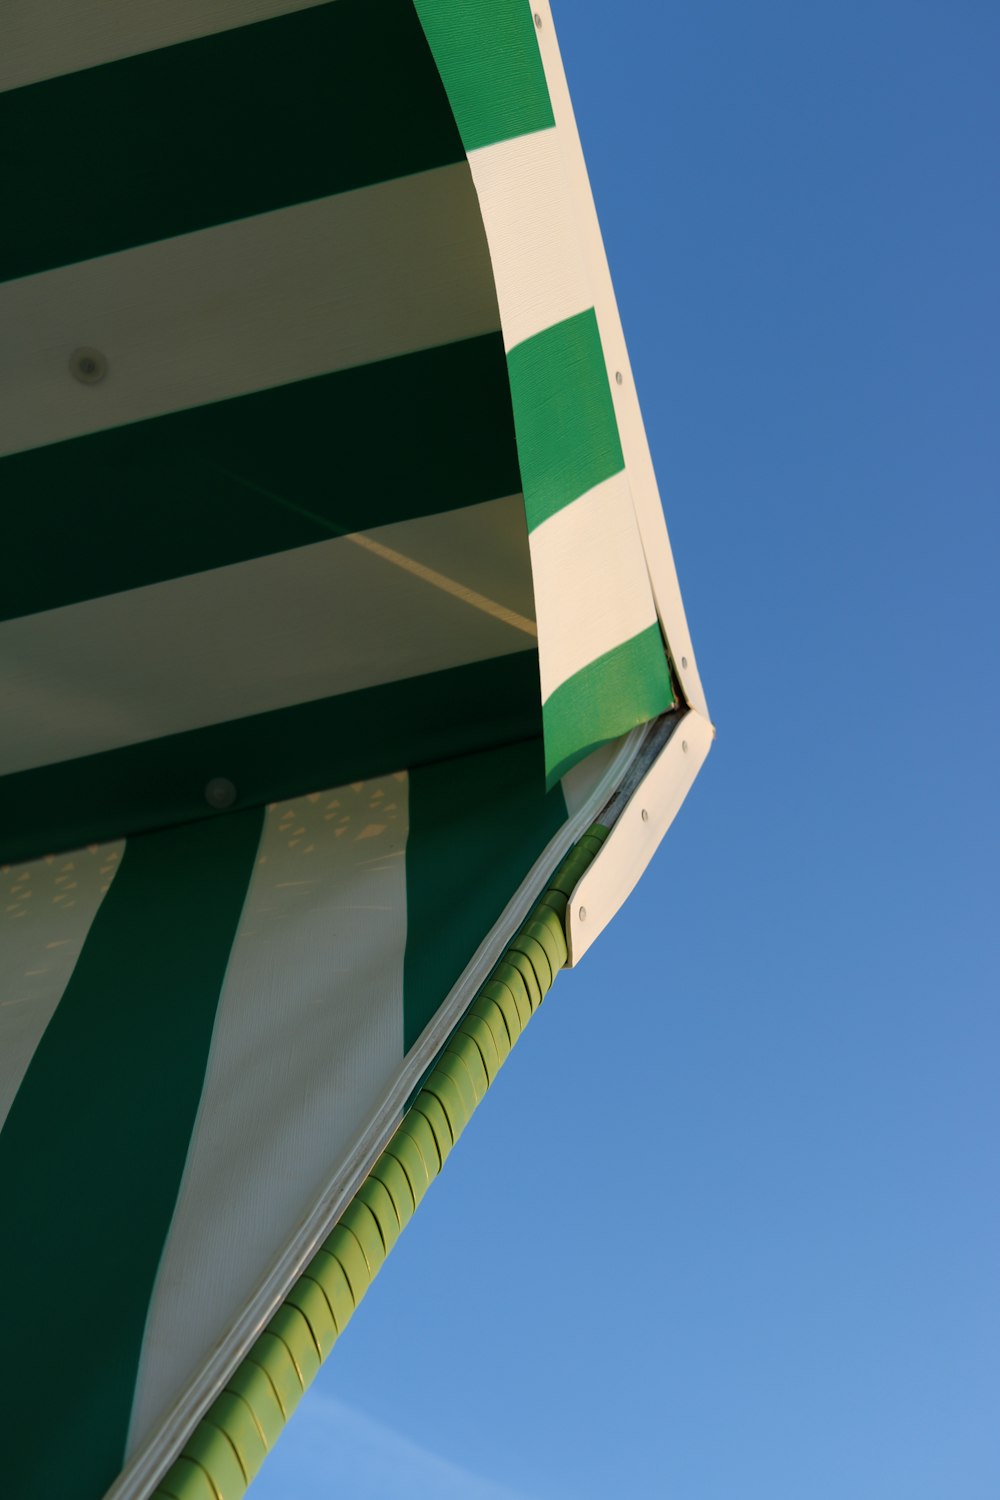 a green and white striped umbrella against a blue sky